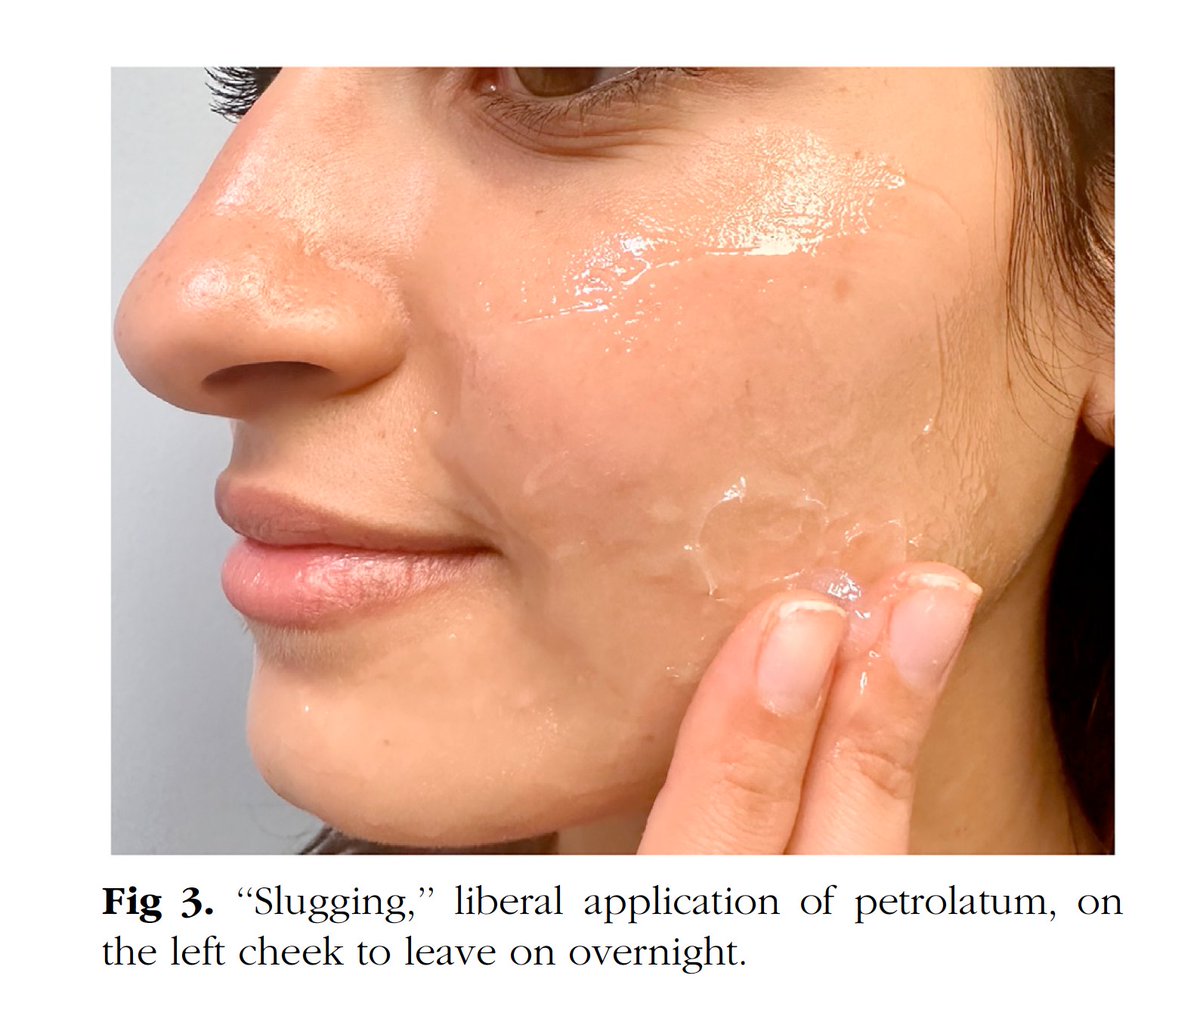 Interesting review article on Petroleum Jelly, the most underrated skin care product on the market. 'Slugging' has brought back this unsung hero of moisturization: pubmed.ncbi.nlm.nih.gov/37315800/